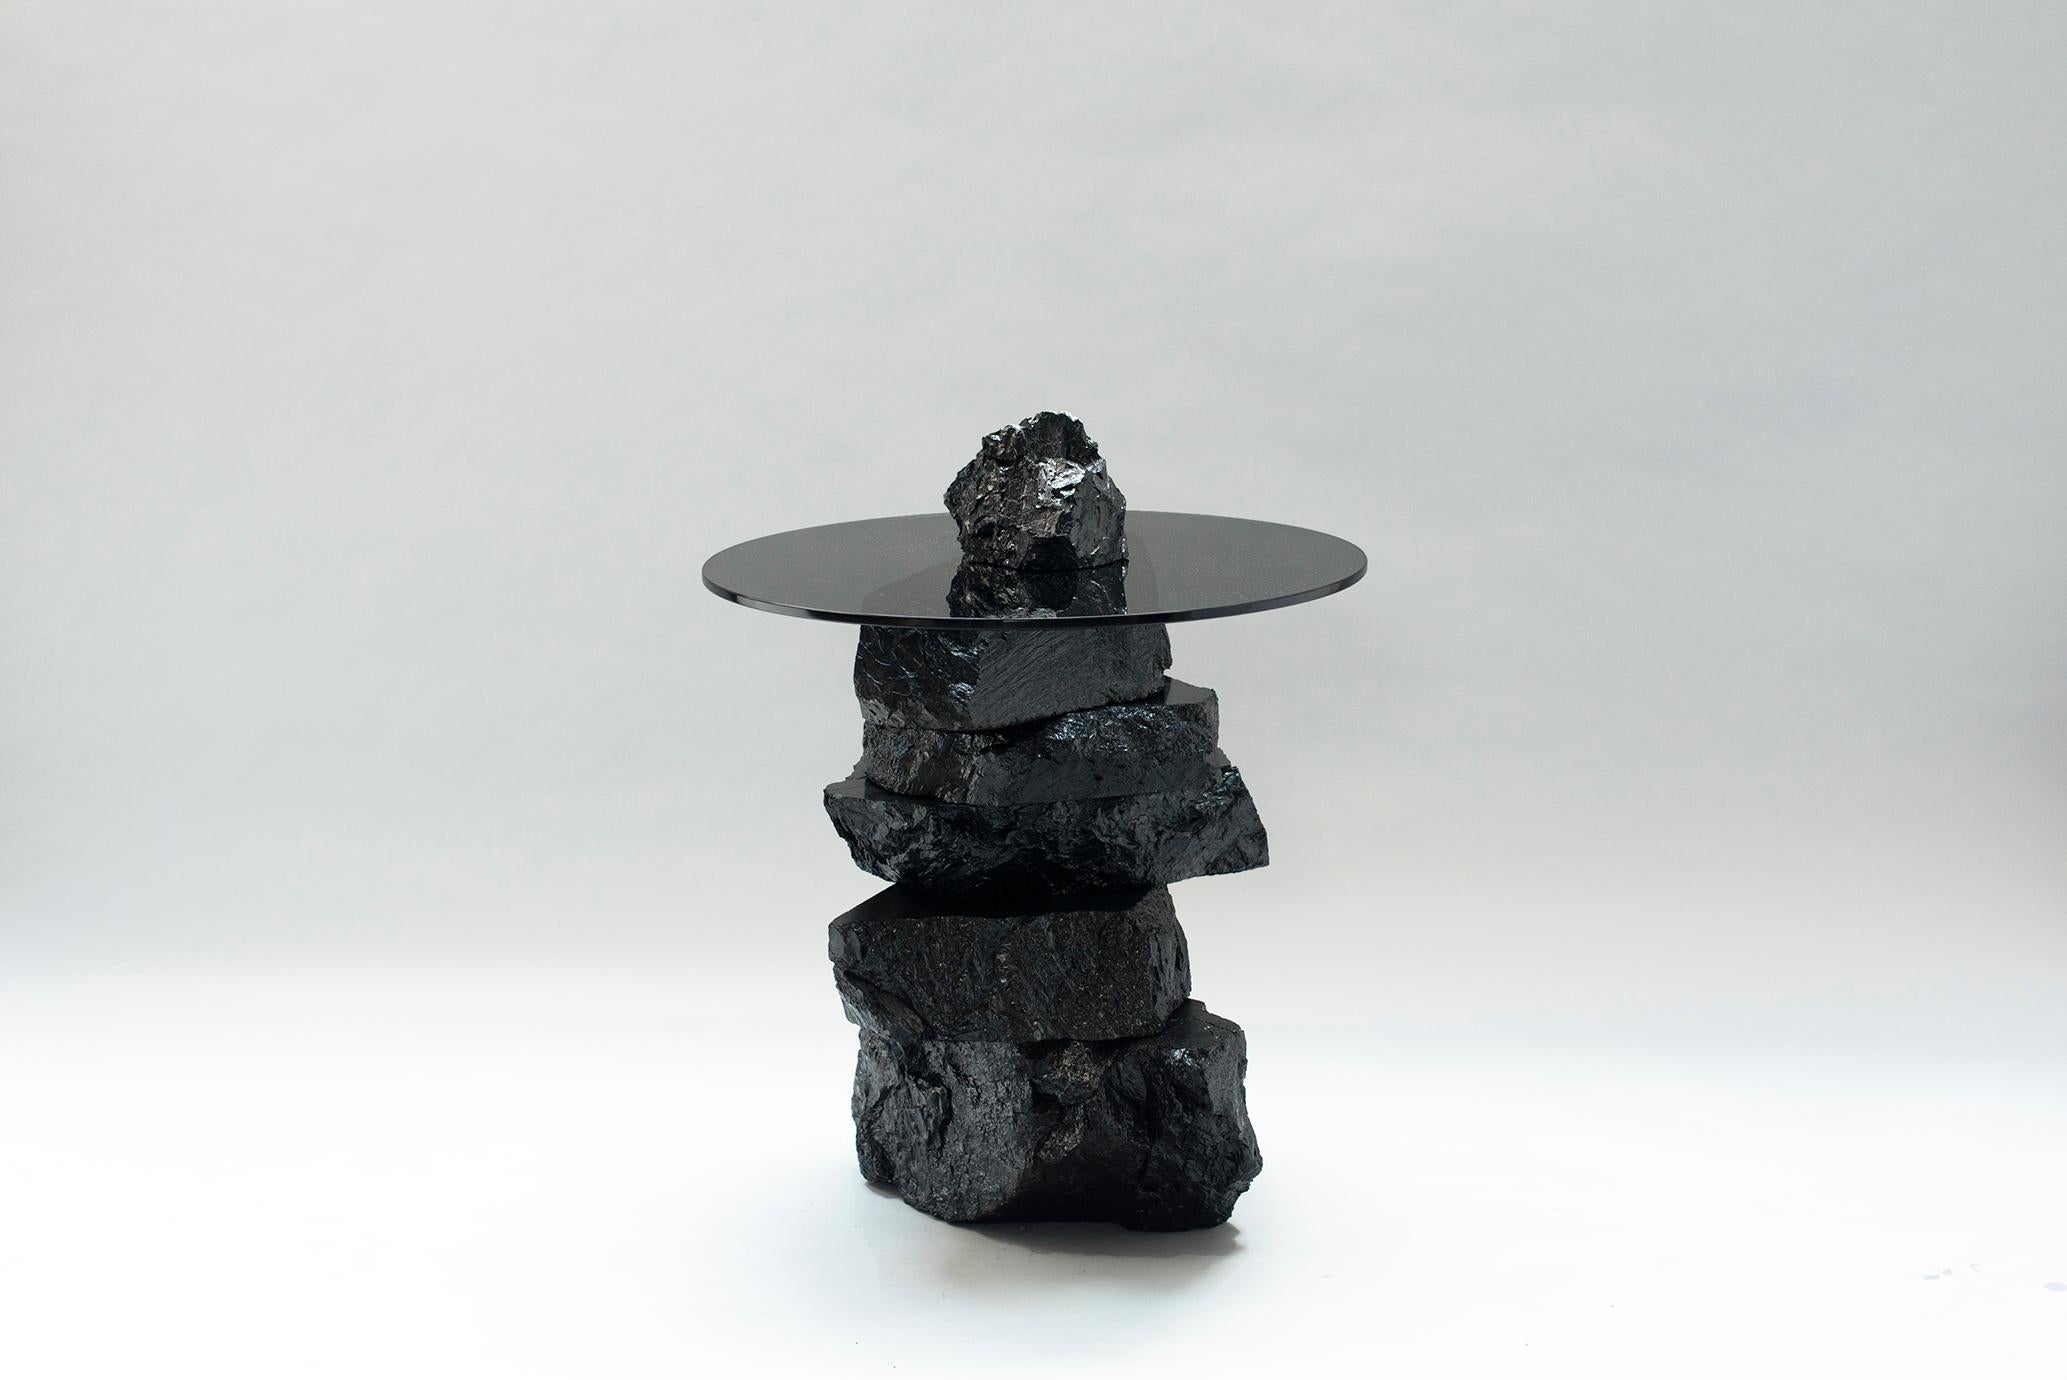 Side table 019 by Jesper Eriksson
Dimensions: D 60 x W 60 x H 70 cm 
Materials: anthracite coal, tempered glass
Weight: 75 kg

Jesper Eriksson (b.1990, Paris) is an artist & designer based in London, interested in work related to the human,